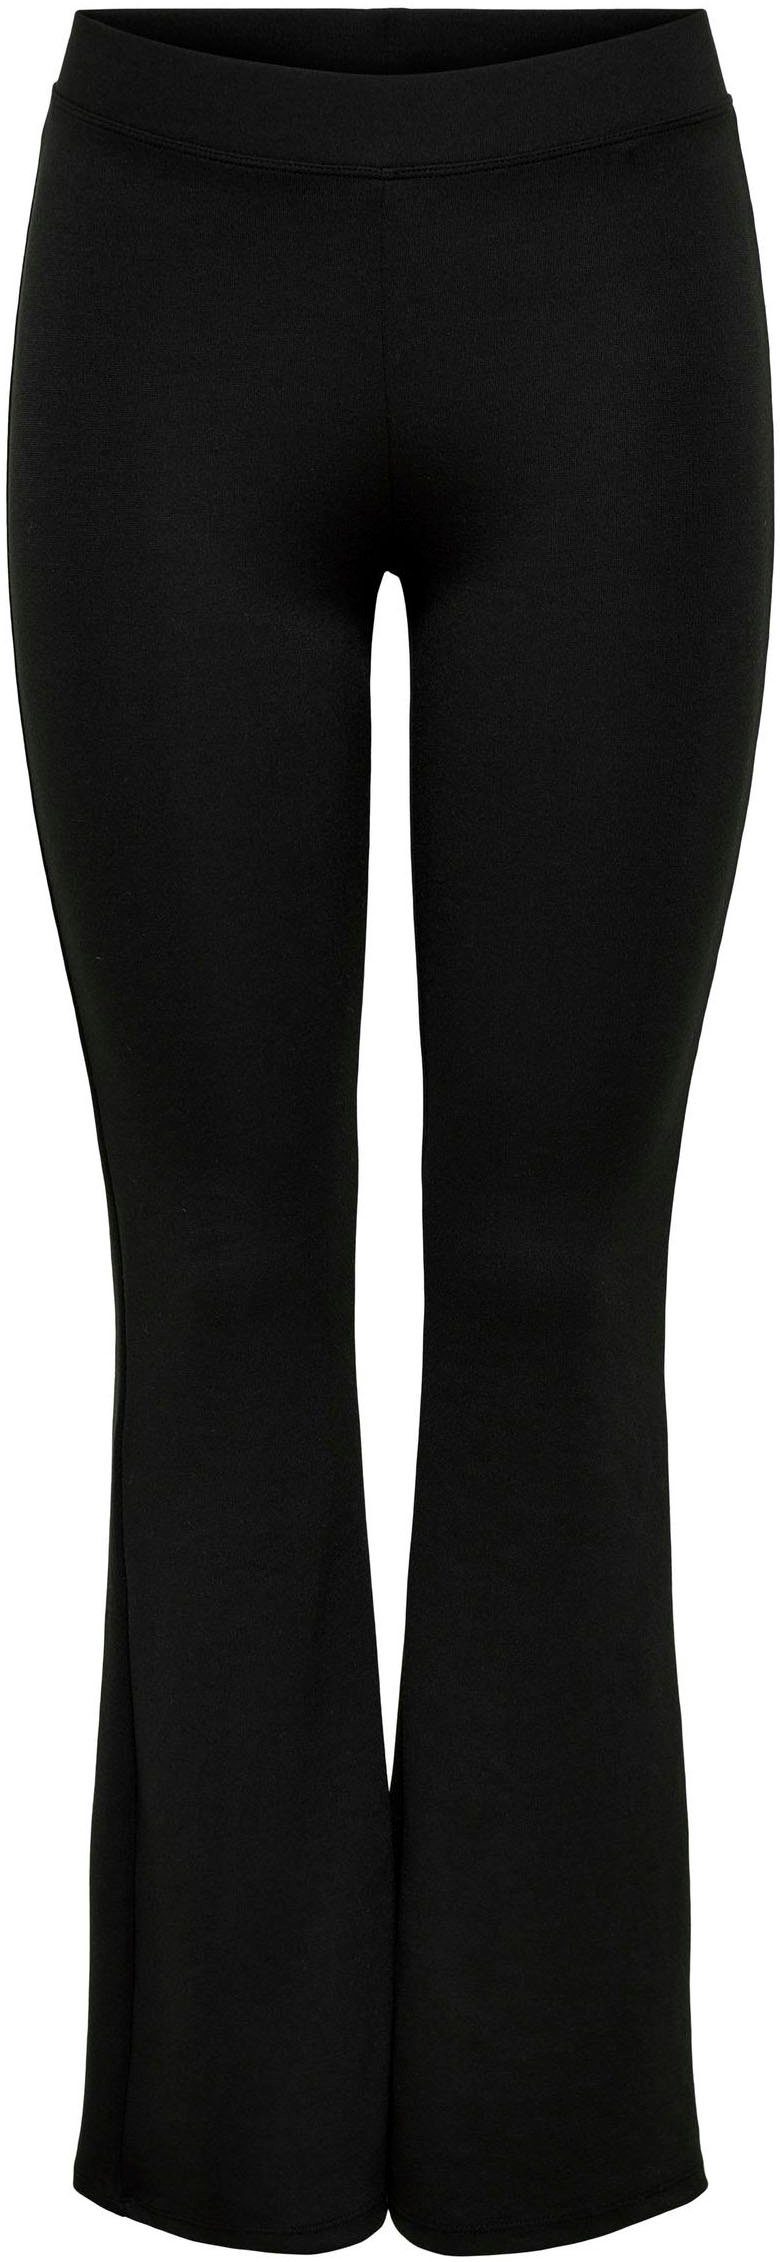 JRS FLAIRED Black 34 STRETCH ONLY Jerseyhose PANTS ONLFEVER